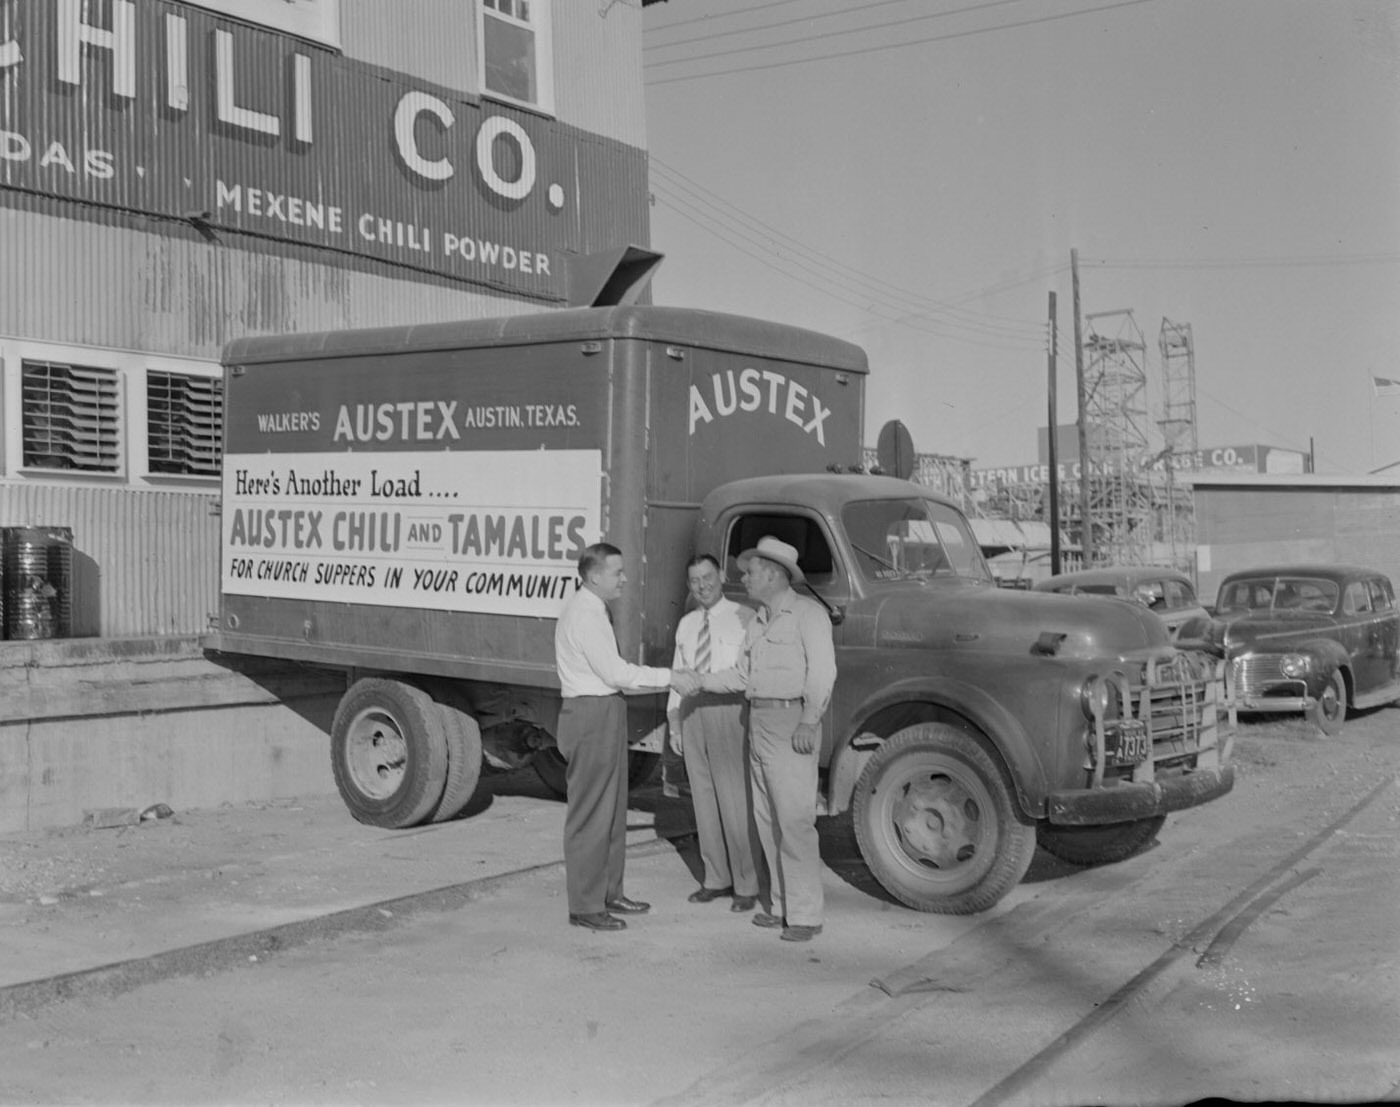 Walker's Austex Chili Company with Truck and Employees, 1952.